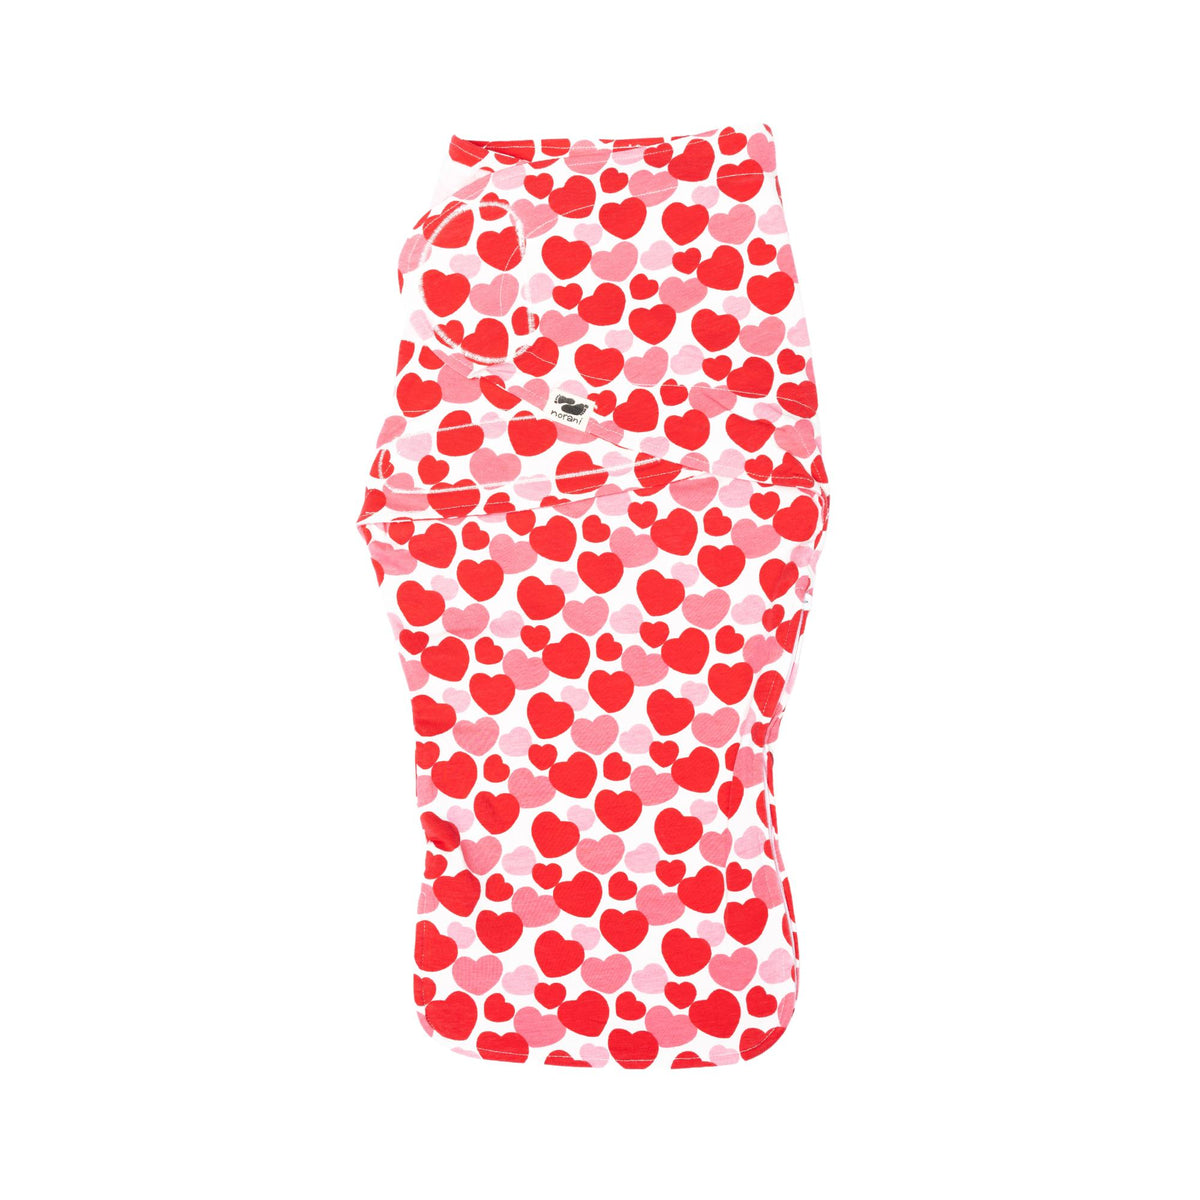 Norani Baby Snugababe Swaddle Pod in Red and Pink Hearts